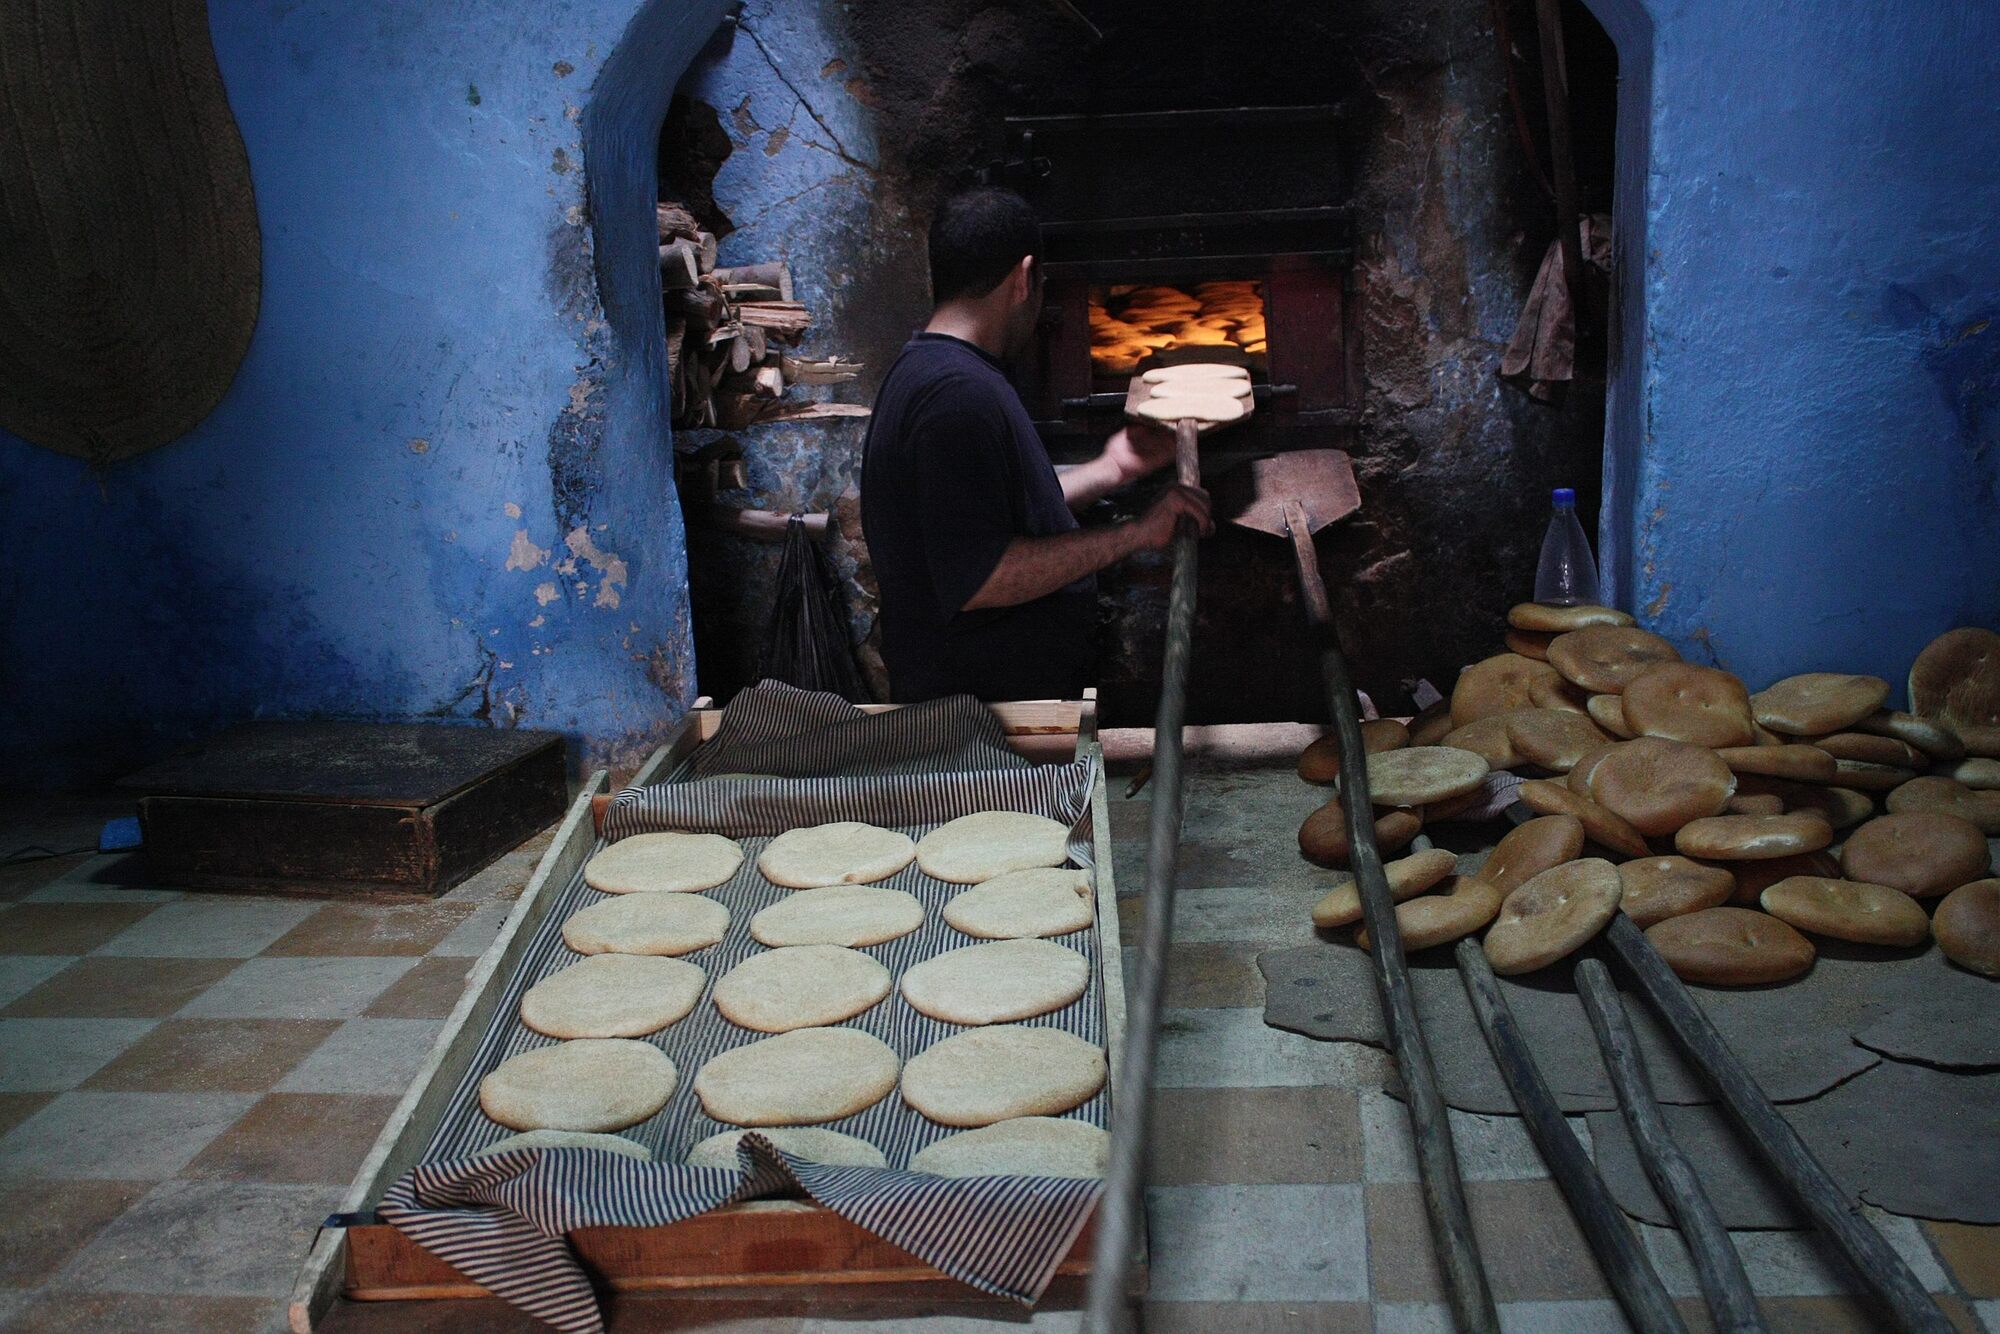 Photograph of a man baking round loaves of bread. The man is standing in front of an open oven built into a blue wall. He is holding a pan with a very long handle, preparing to slide it into the oven. The pan has three loaves of unbaked bread dough on it. A cart with many additional uncooked loaves is in the foreground. A pile of baked loaves is next to the oven.